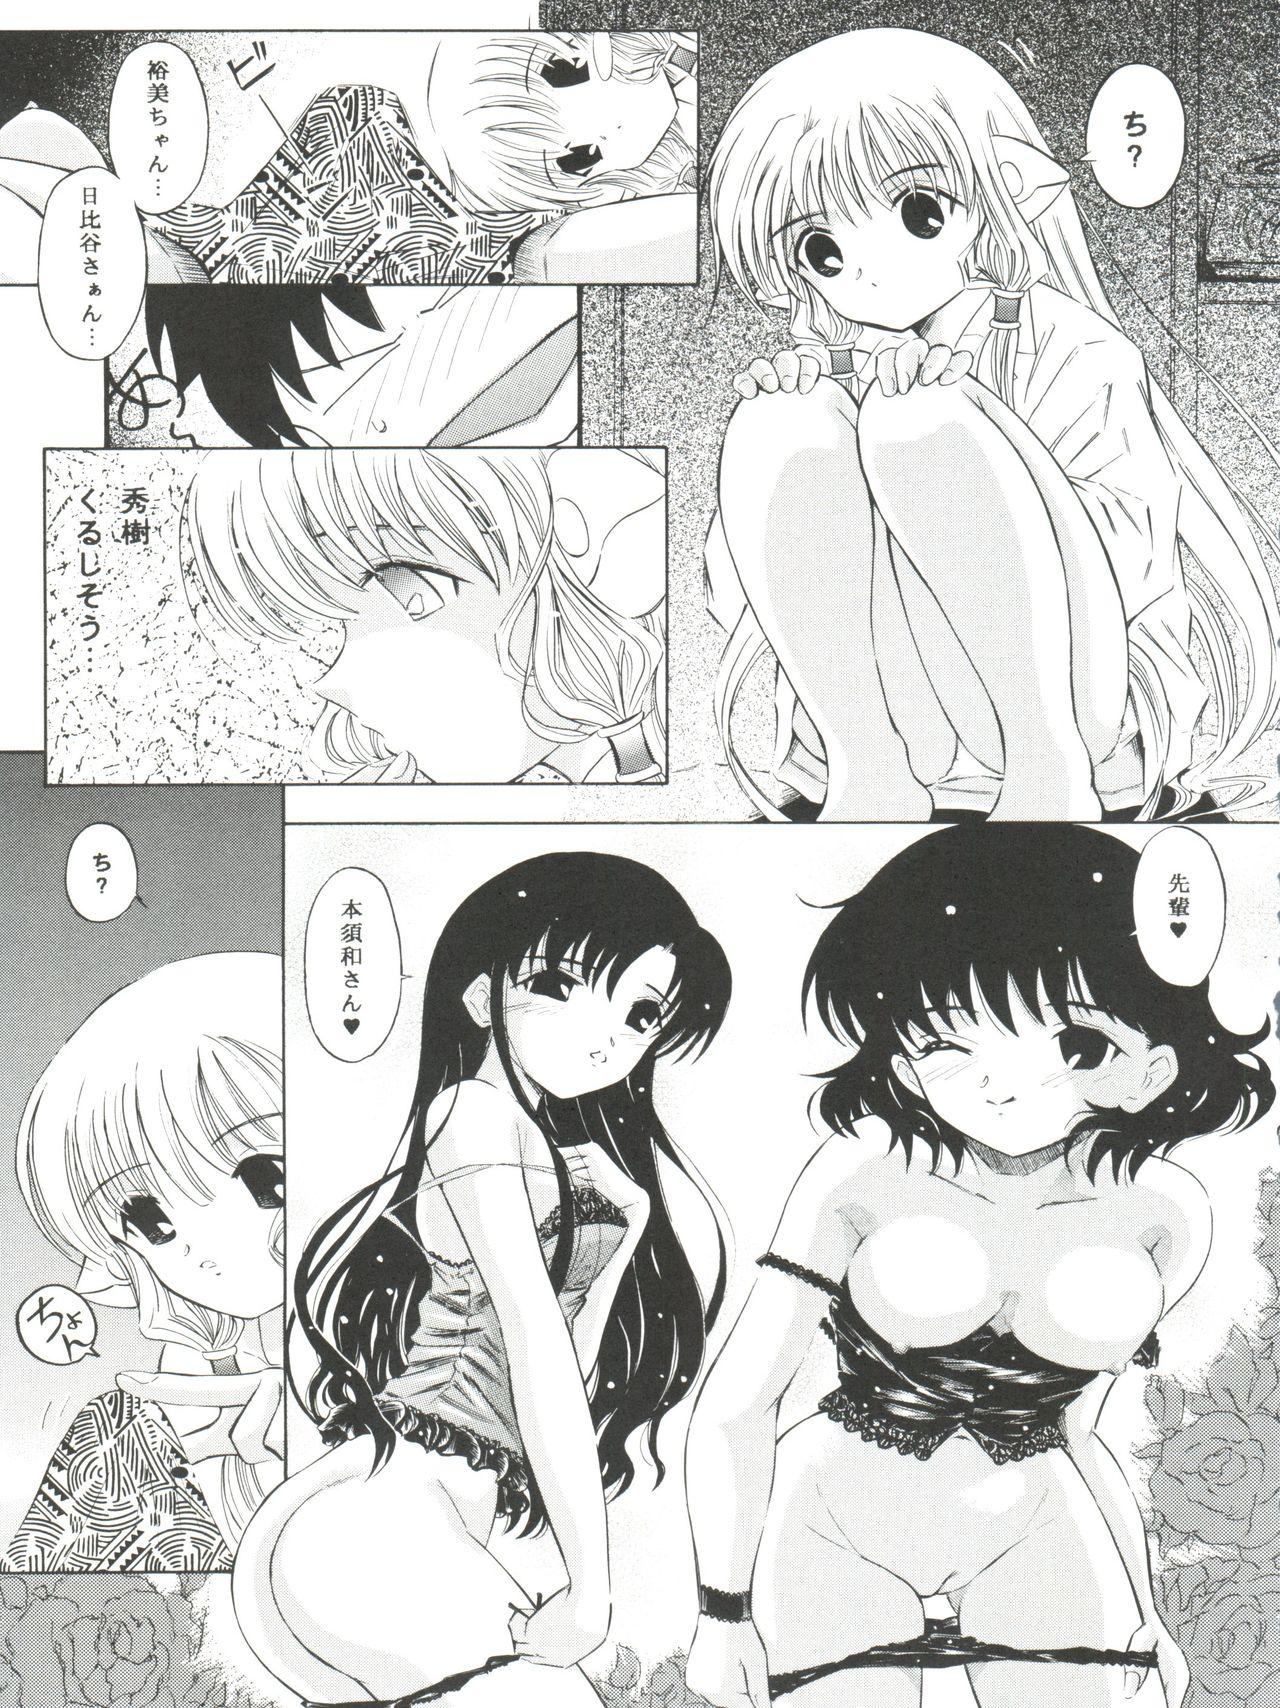 Hijab Tricolor - Cardcaptor sakura Chobits Angelic layer Squirt - Page 9